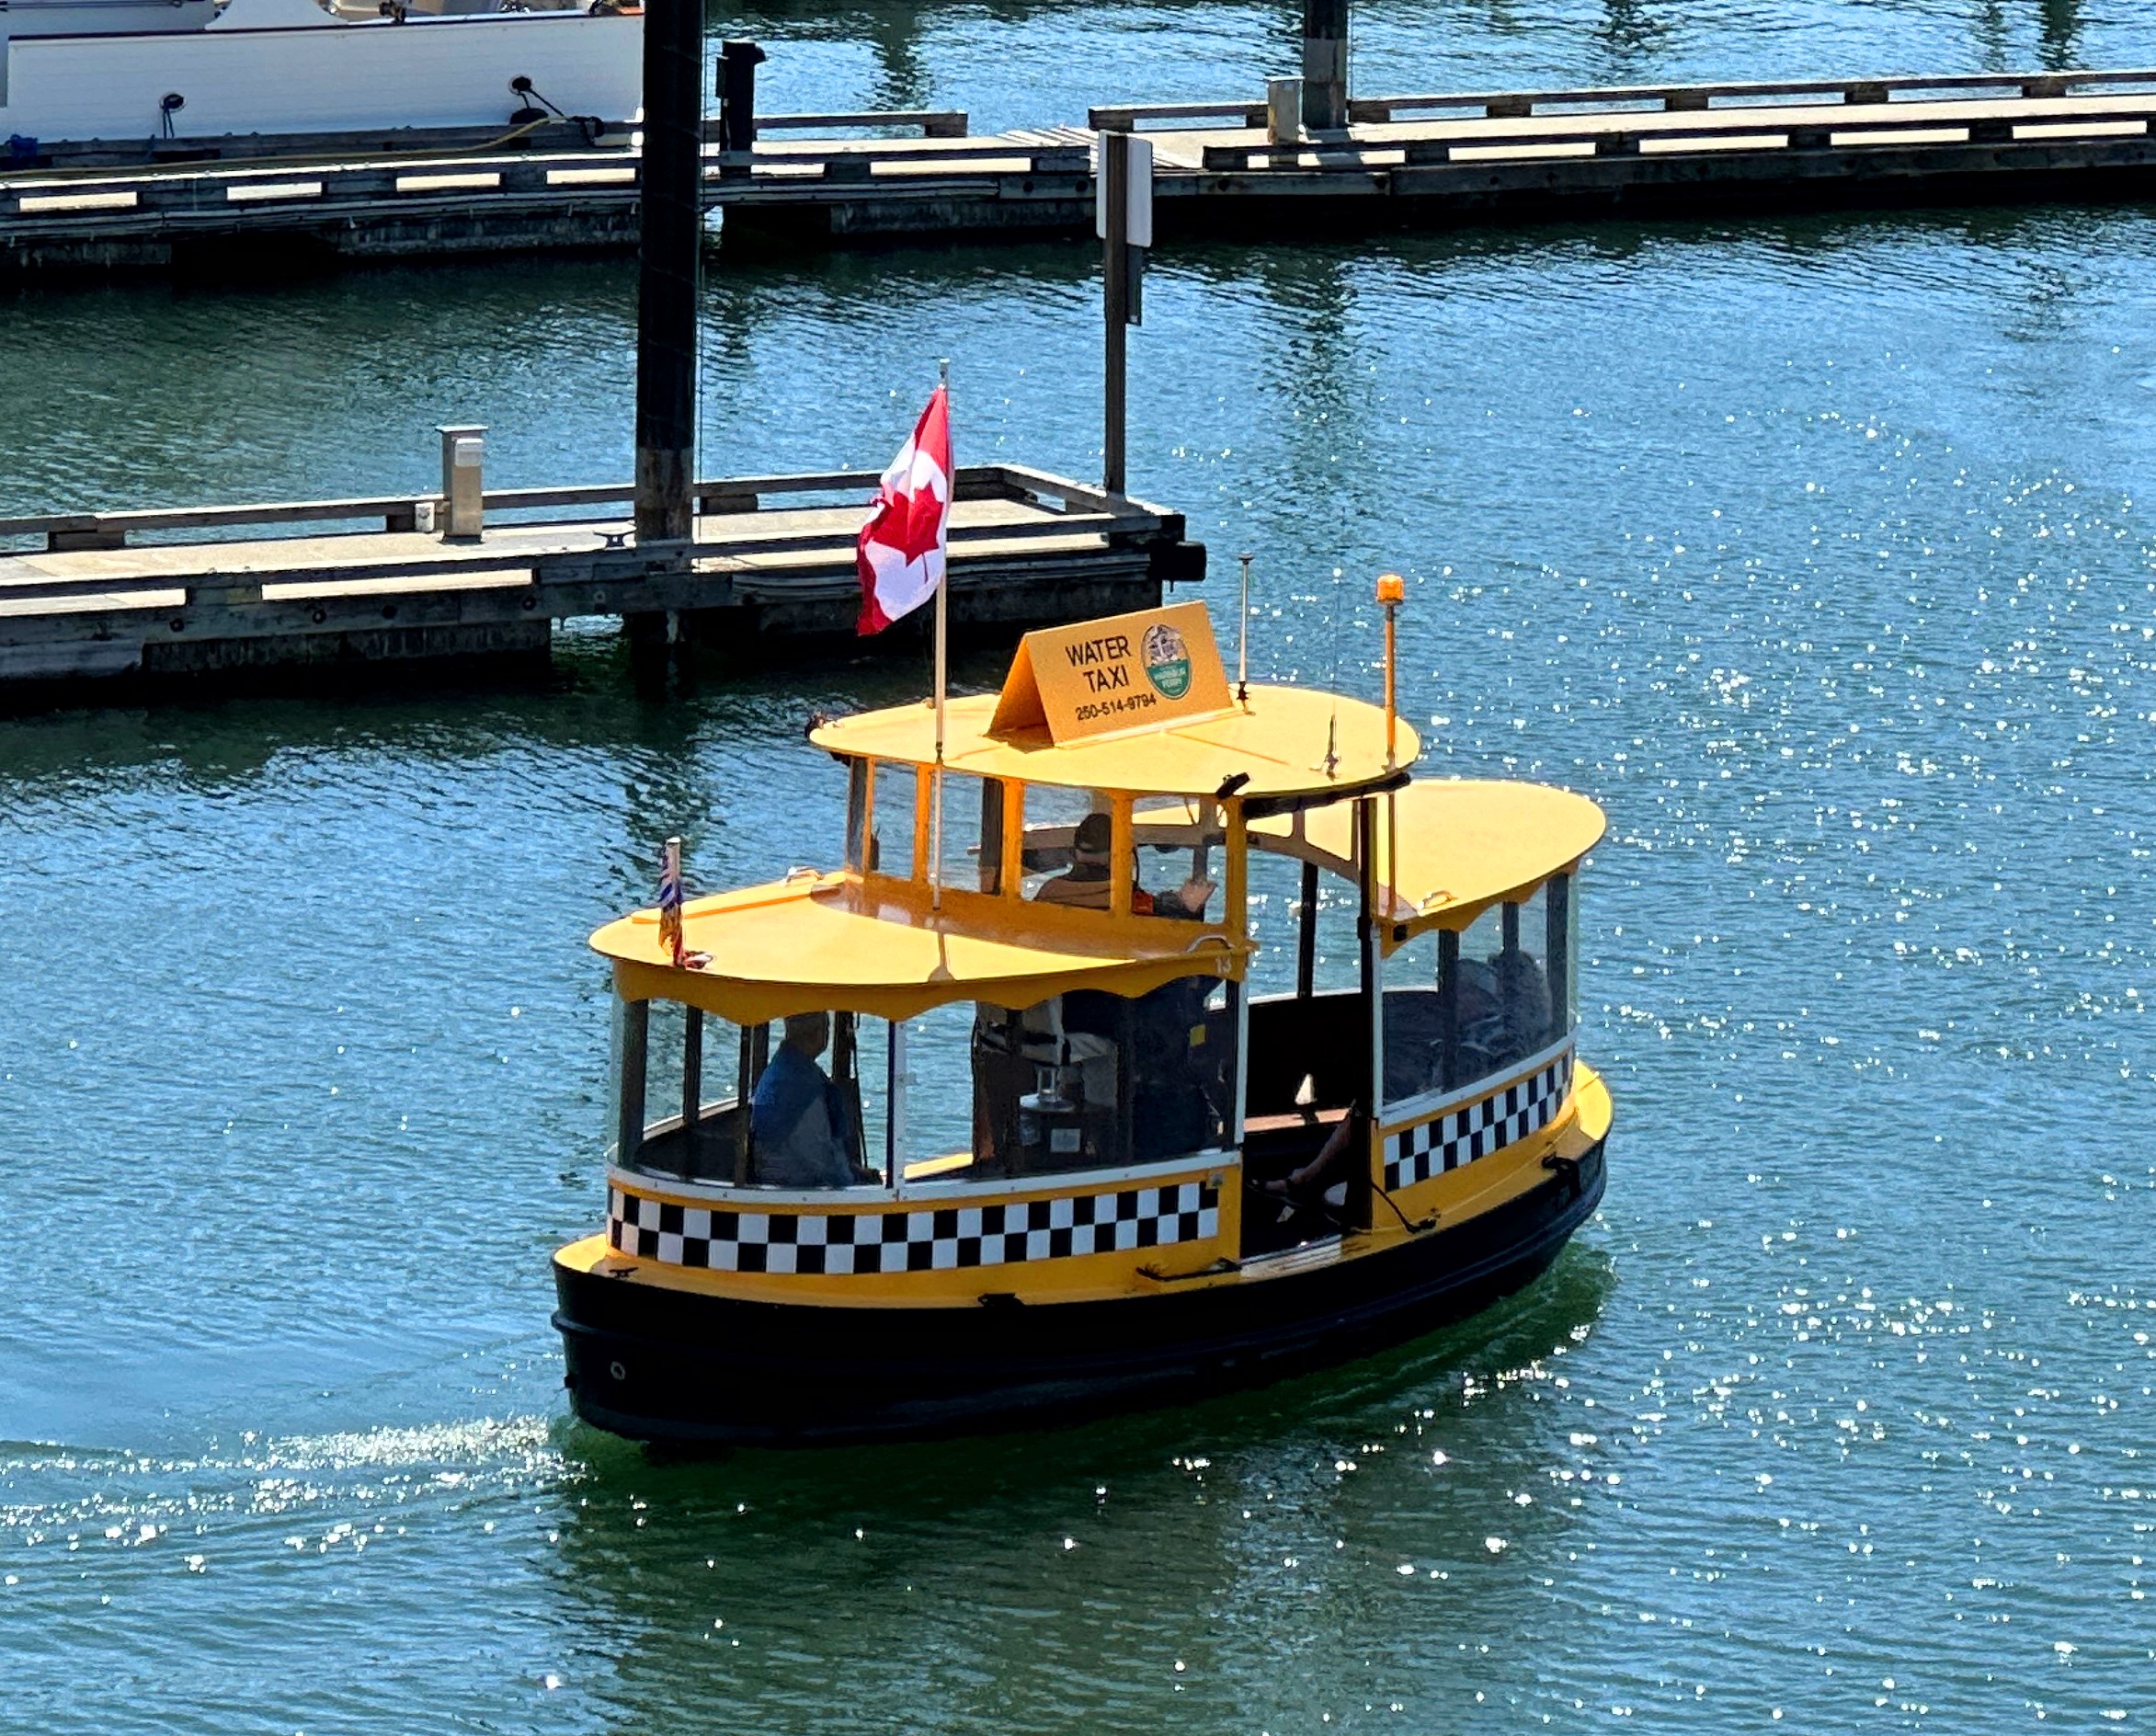 Water Taxi in Victoria BC